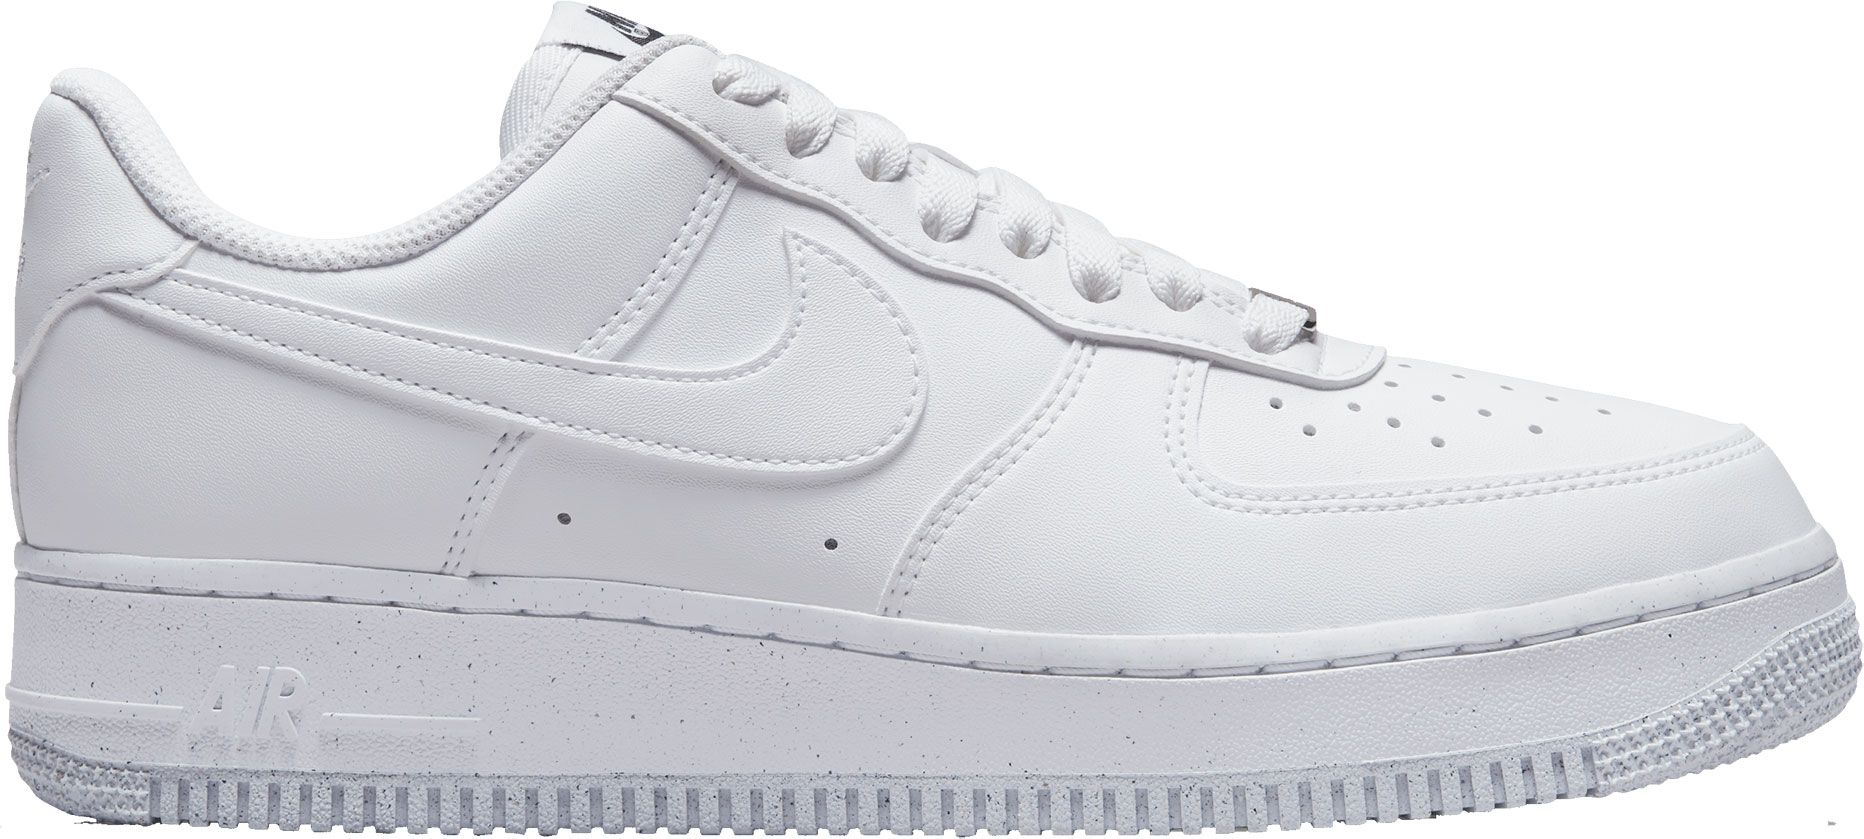 where can i buy air force 1 near me